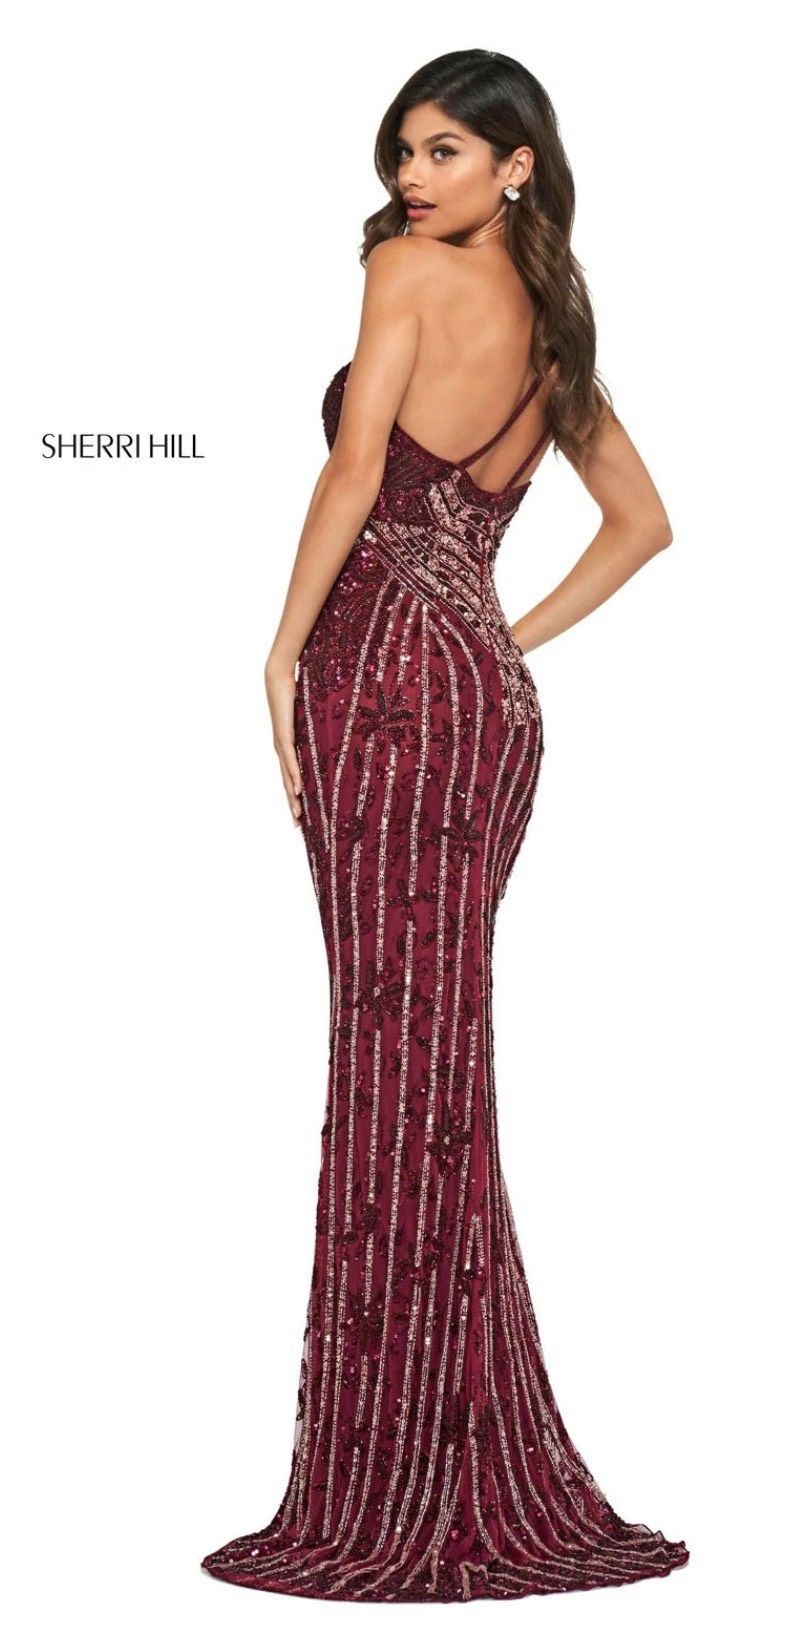 Sherri Hill Size 2 Bridesmaid One Shoulder Sequined Burgundy Red Side Slit Dress on Queenly